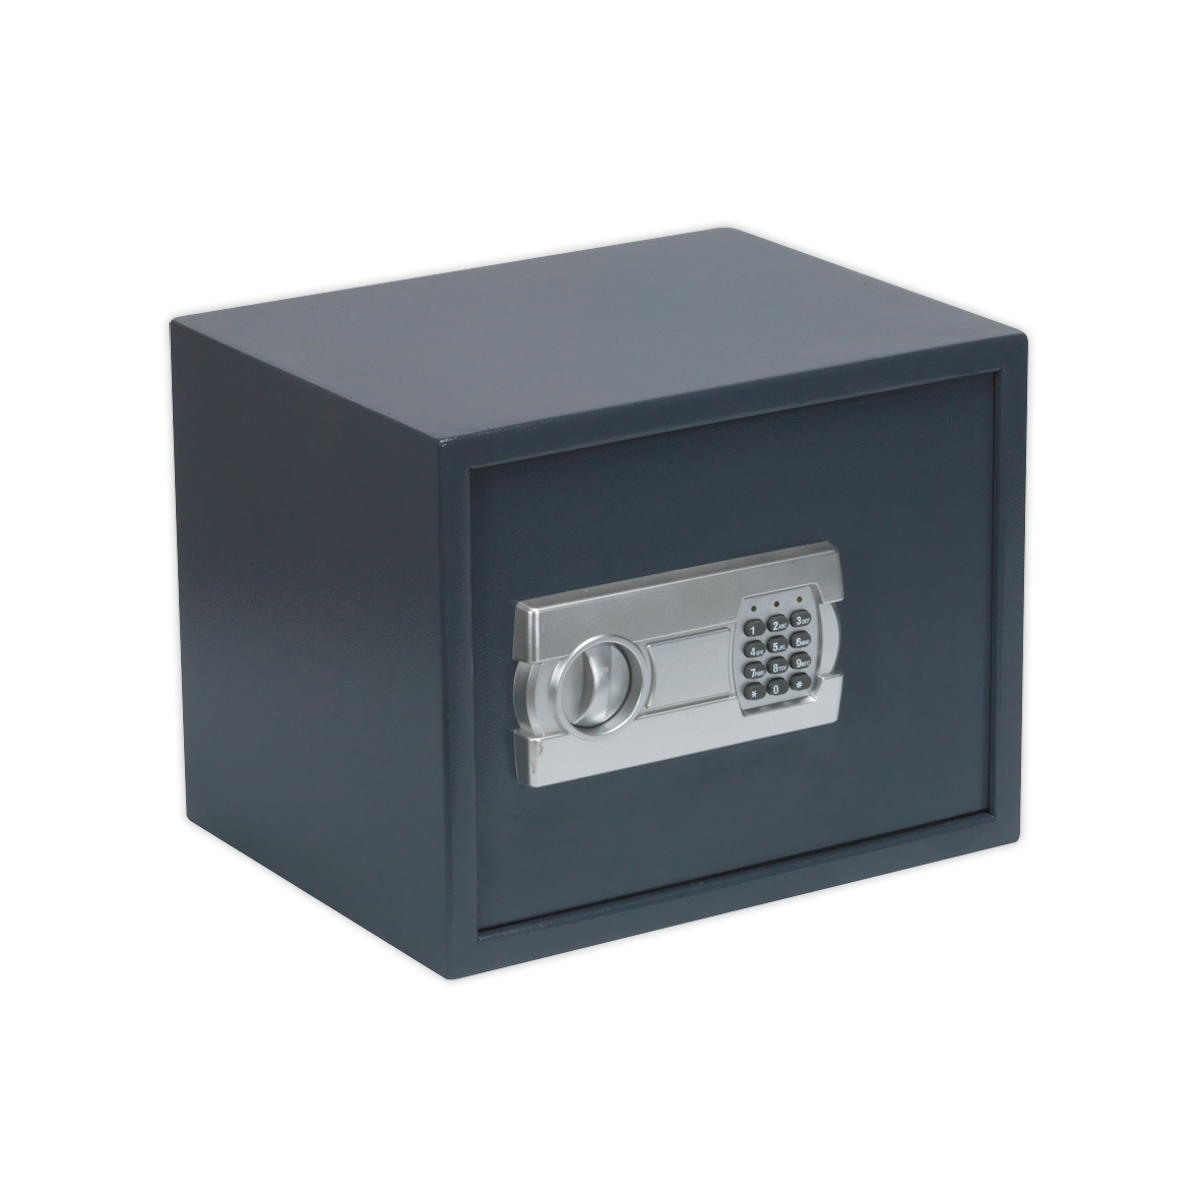 Sealey Electronic Combination Security Safe 380 x 300 x 300mm